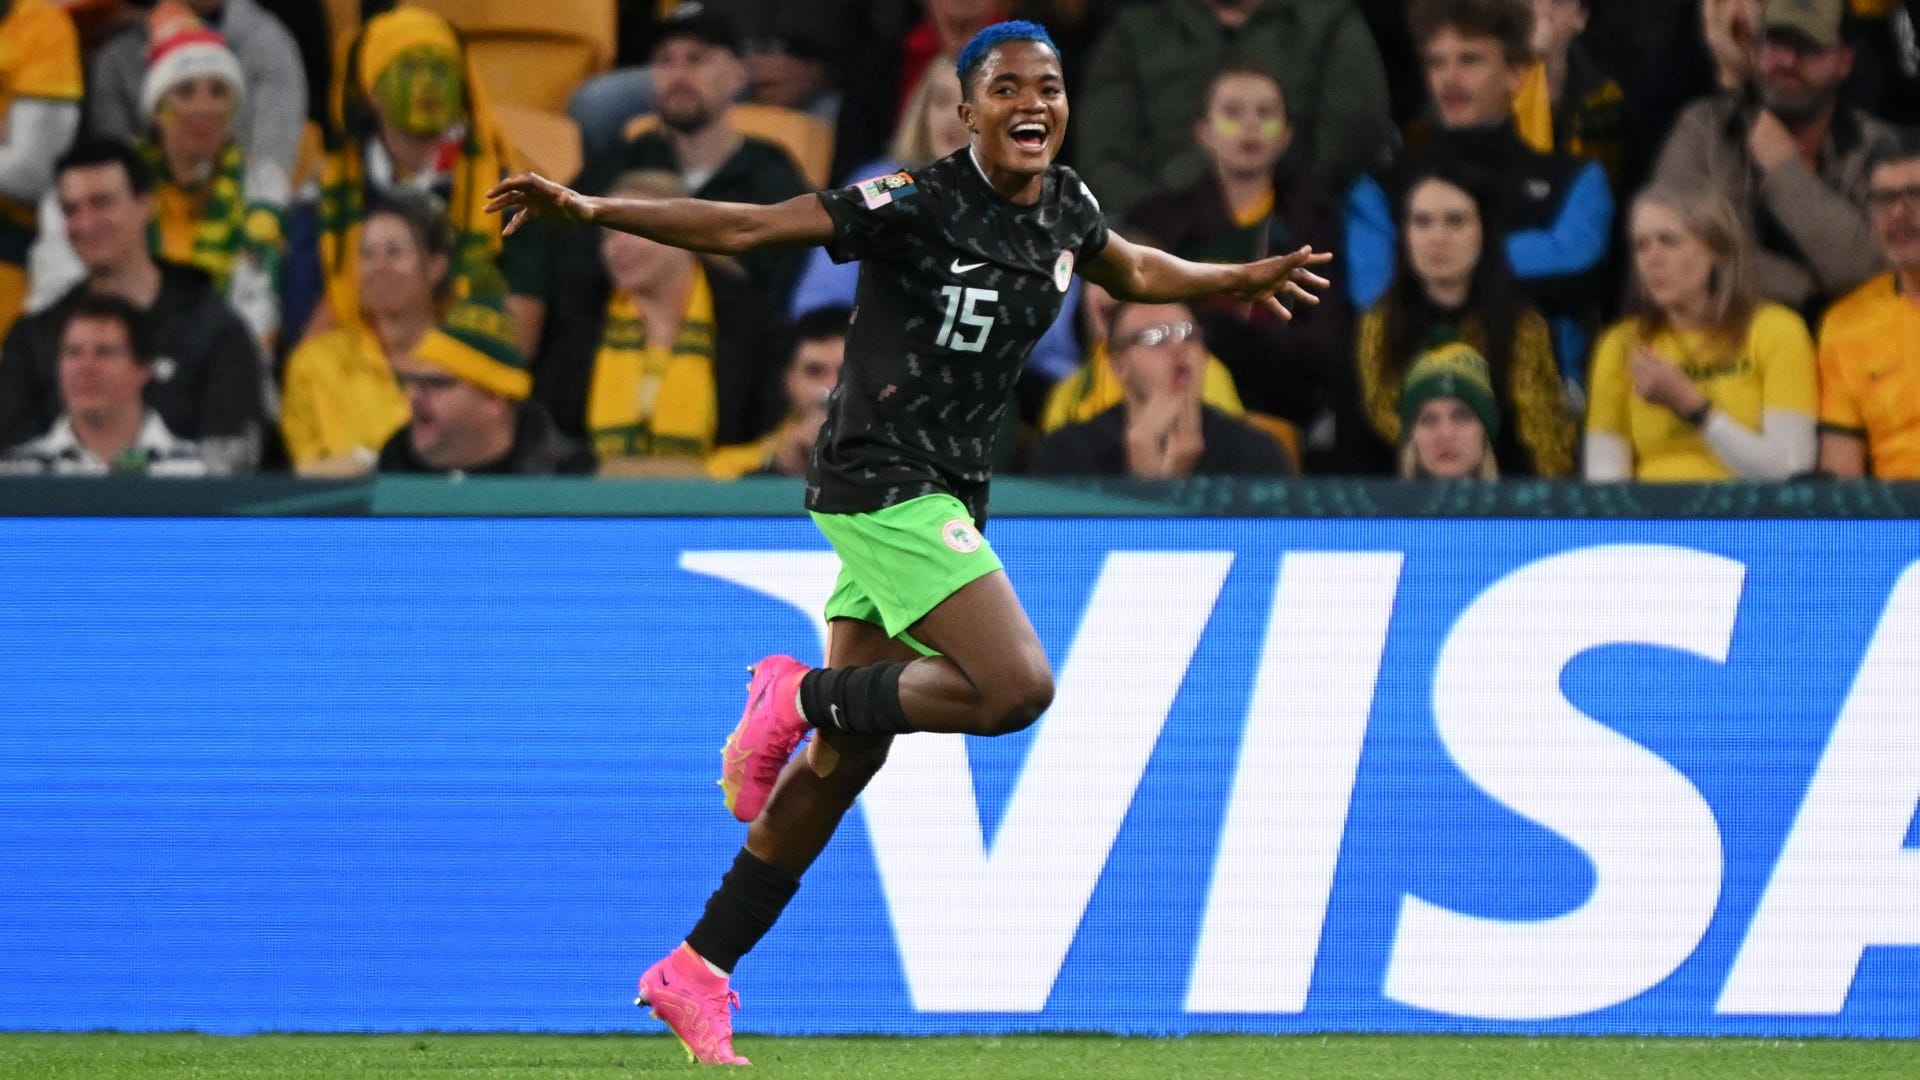 Ireland Women vs Nigeria Women Live stream, TV channel, kick-off time and where to watch Goal UK